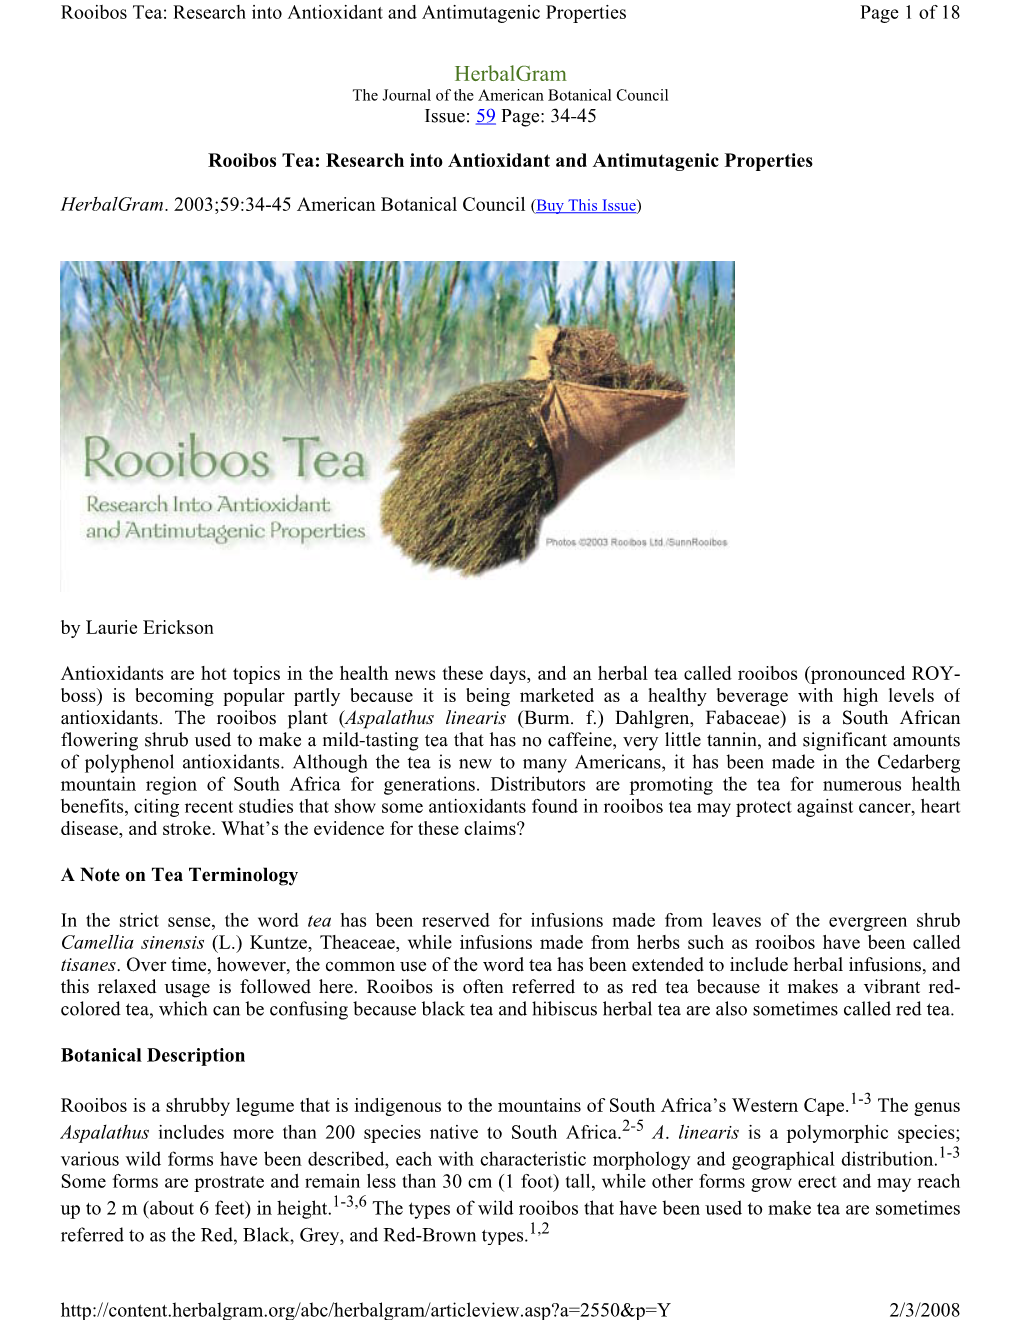 Herbalgram the Journal of the American Botanical Council Issue: 59 Page: 34-45